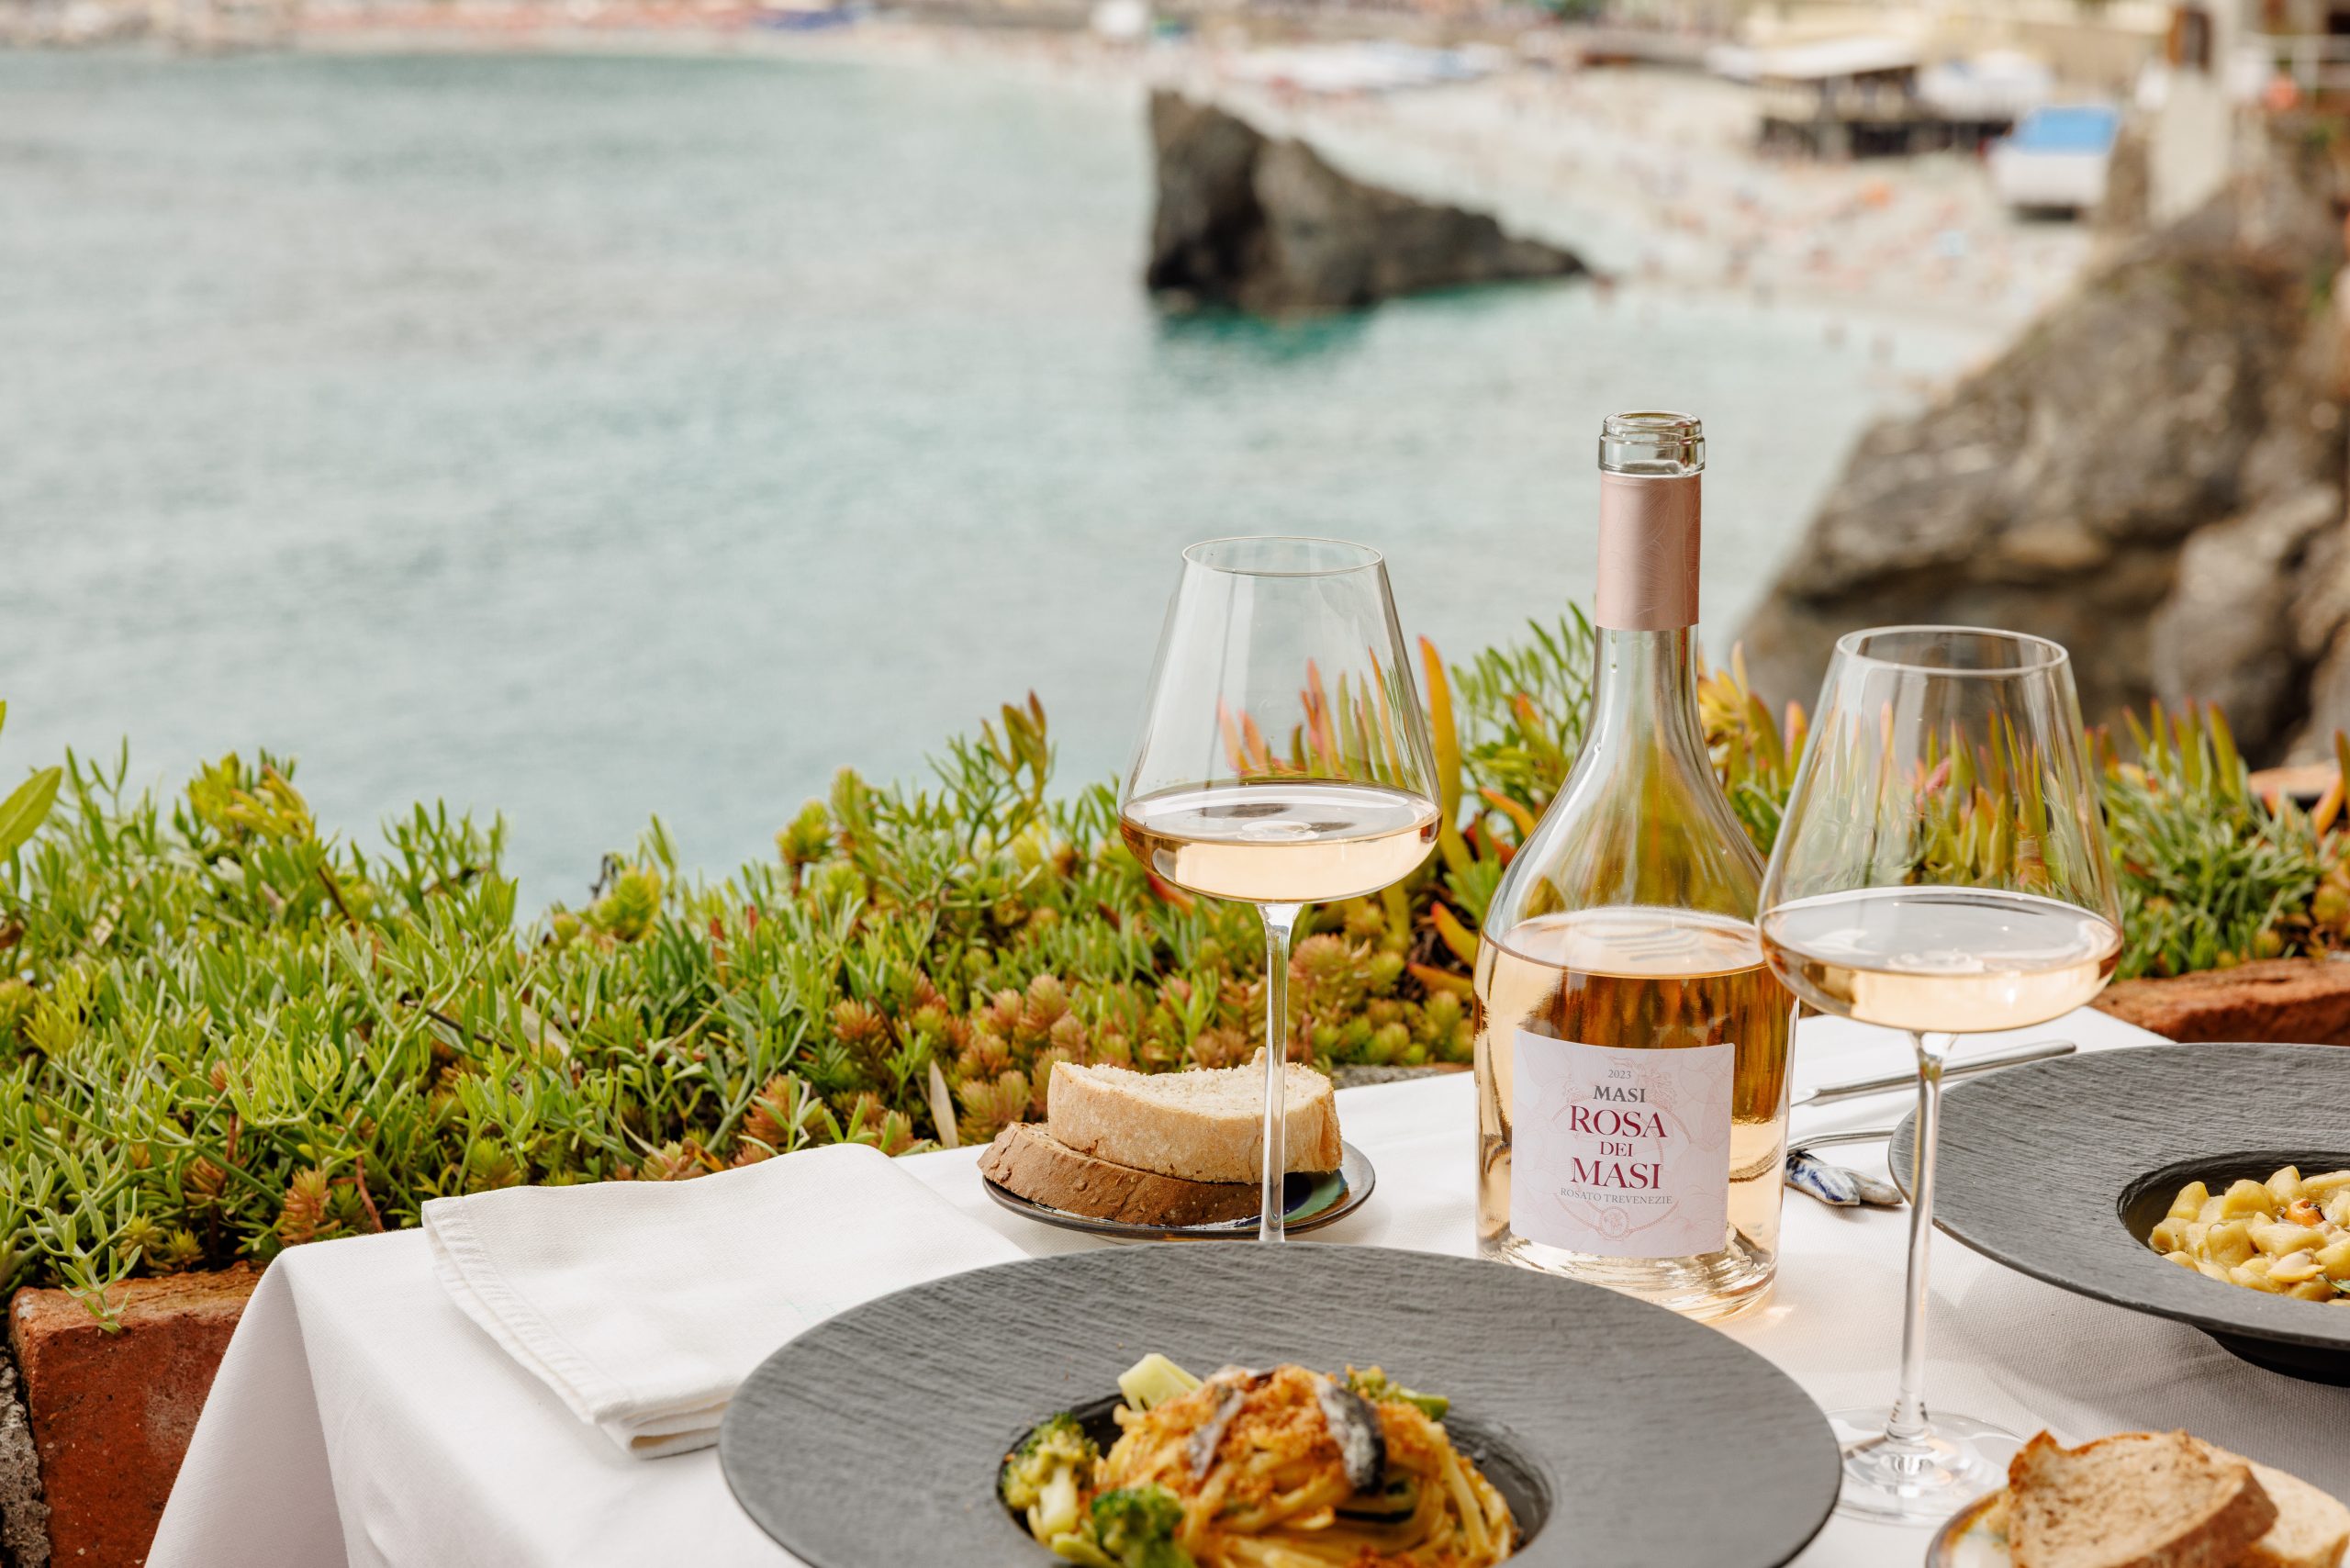 A table is set for a meal overlooking a bay. On it is a bottle of Rosa dei Masi, two glasses of the wine, bread, a pasta dish and napkins.